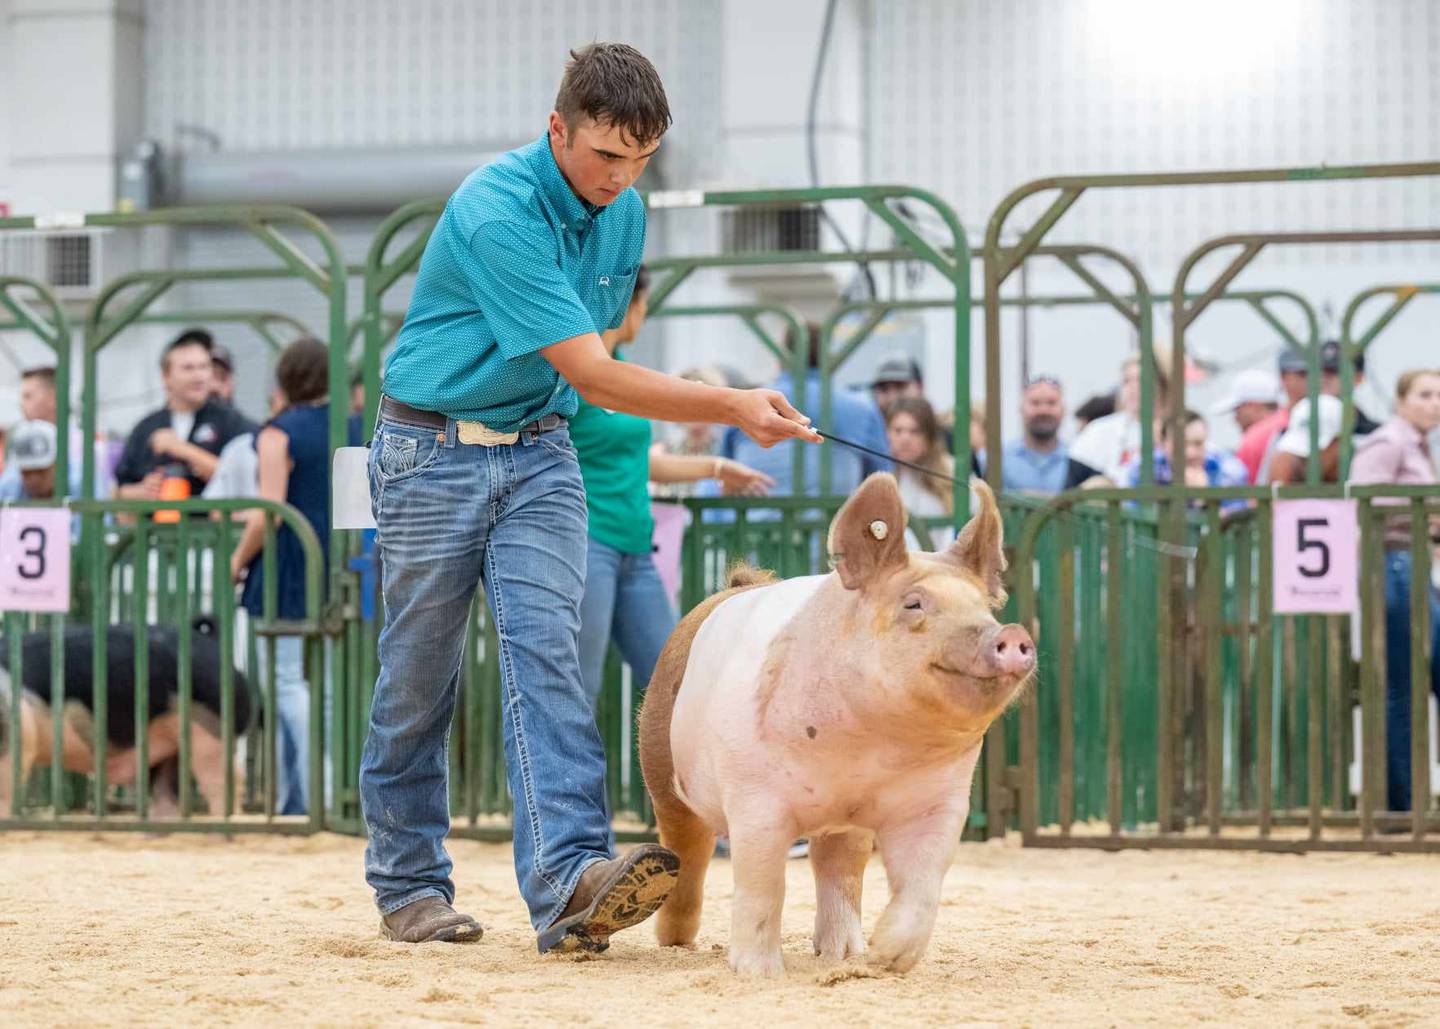 Braxton Pittman shows his pig at one of the many competitions he travels to each year including jackpot events and county and state fairs.